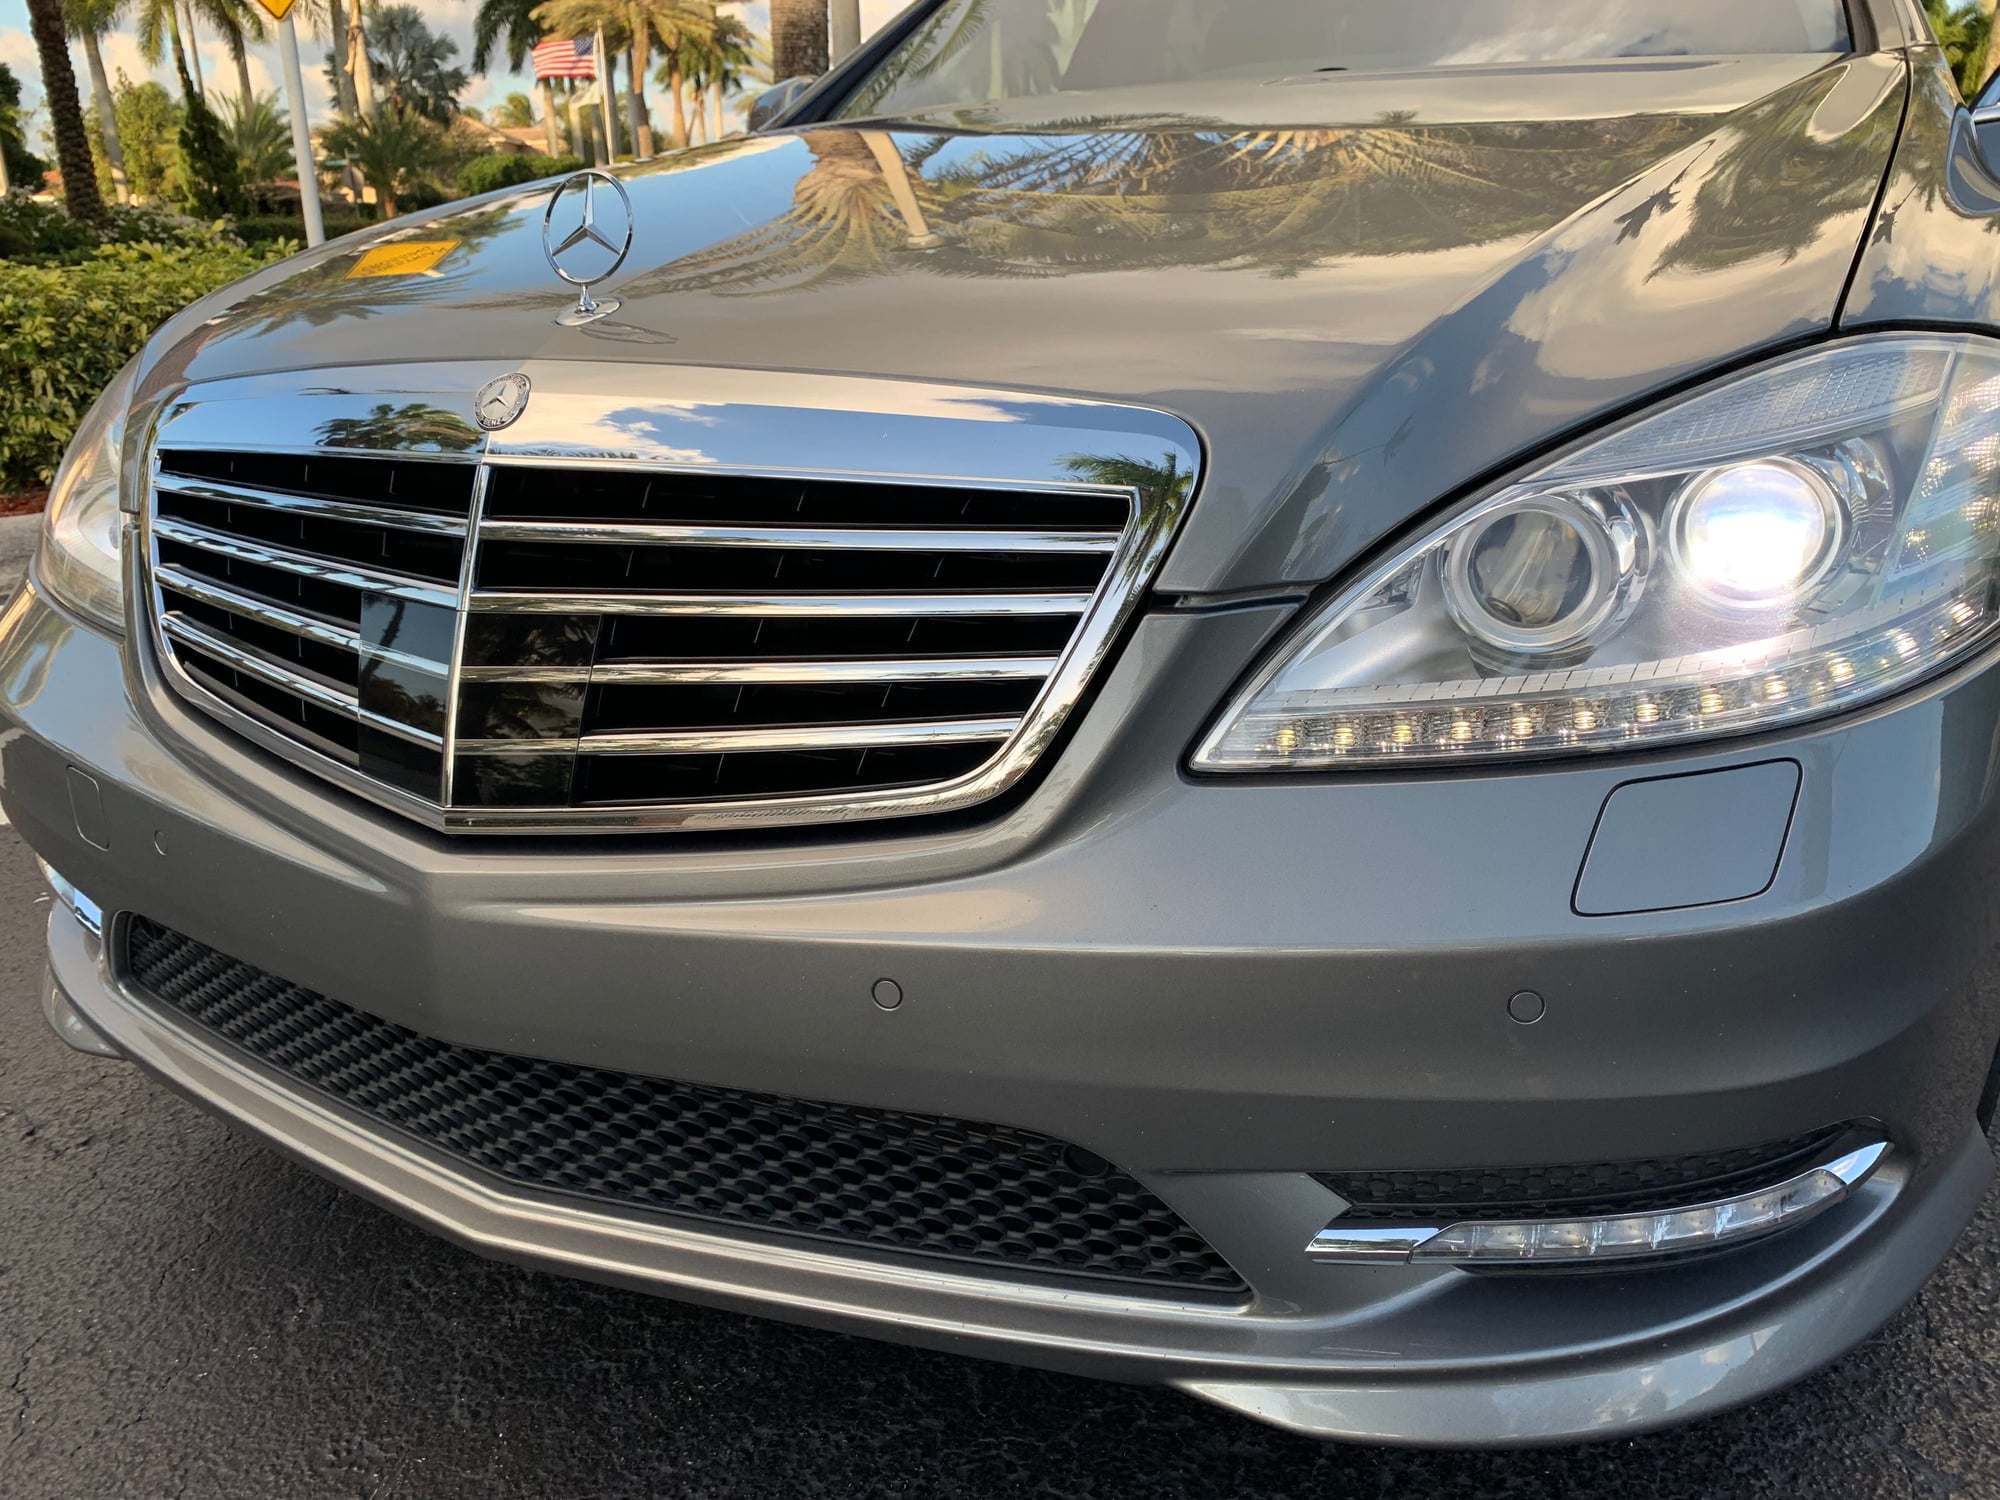 2012 Mercedes-Benz S550 - 2012 Mercedes Benz S550 AMG SPORT PKG - IMMACULATE! - Used - VIN WBA12312312312312 - 58,500 Miles - 8 cyl - 2WD - Automatic - Sedan - Gray - Broward Co, FL 33065, United States